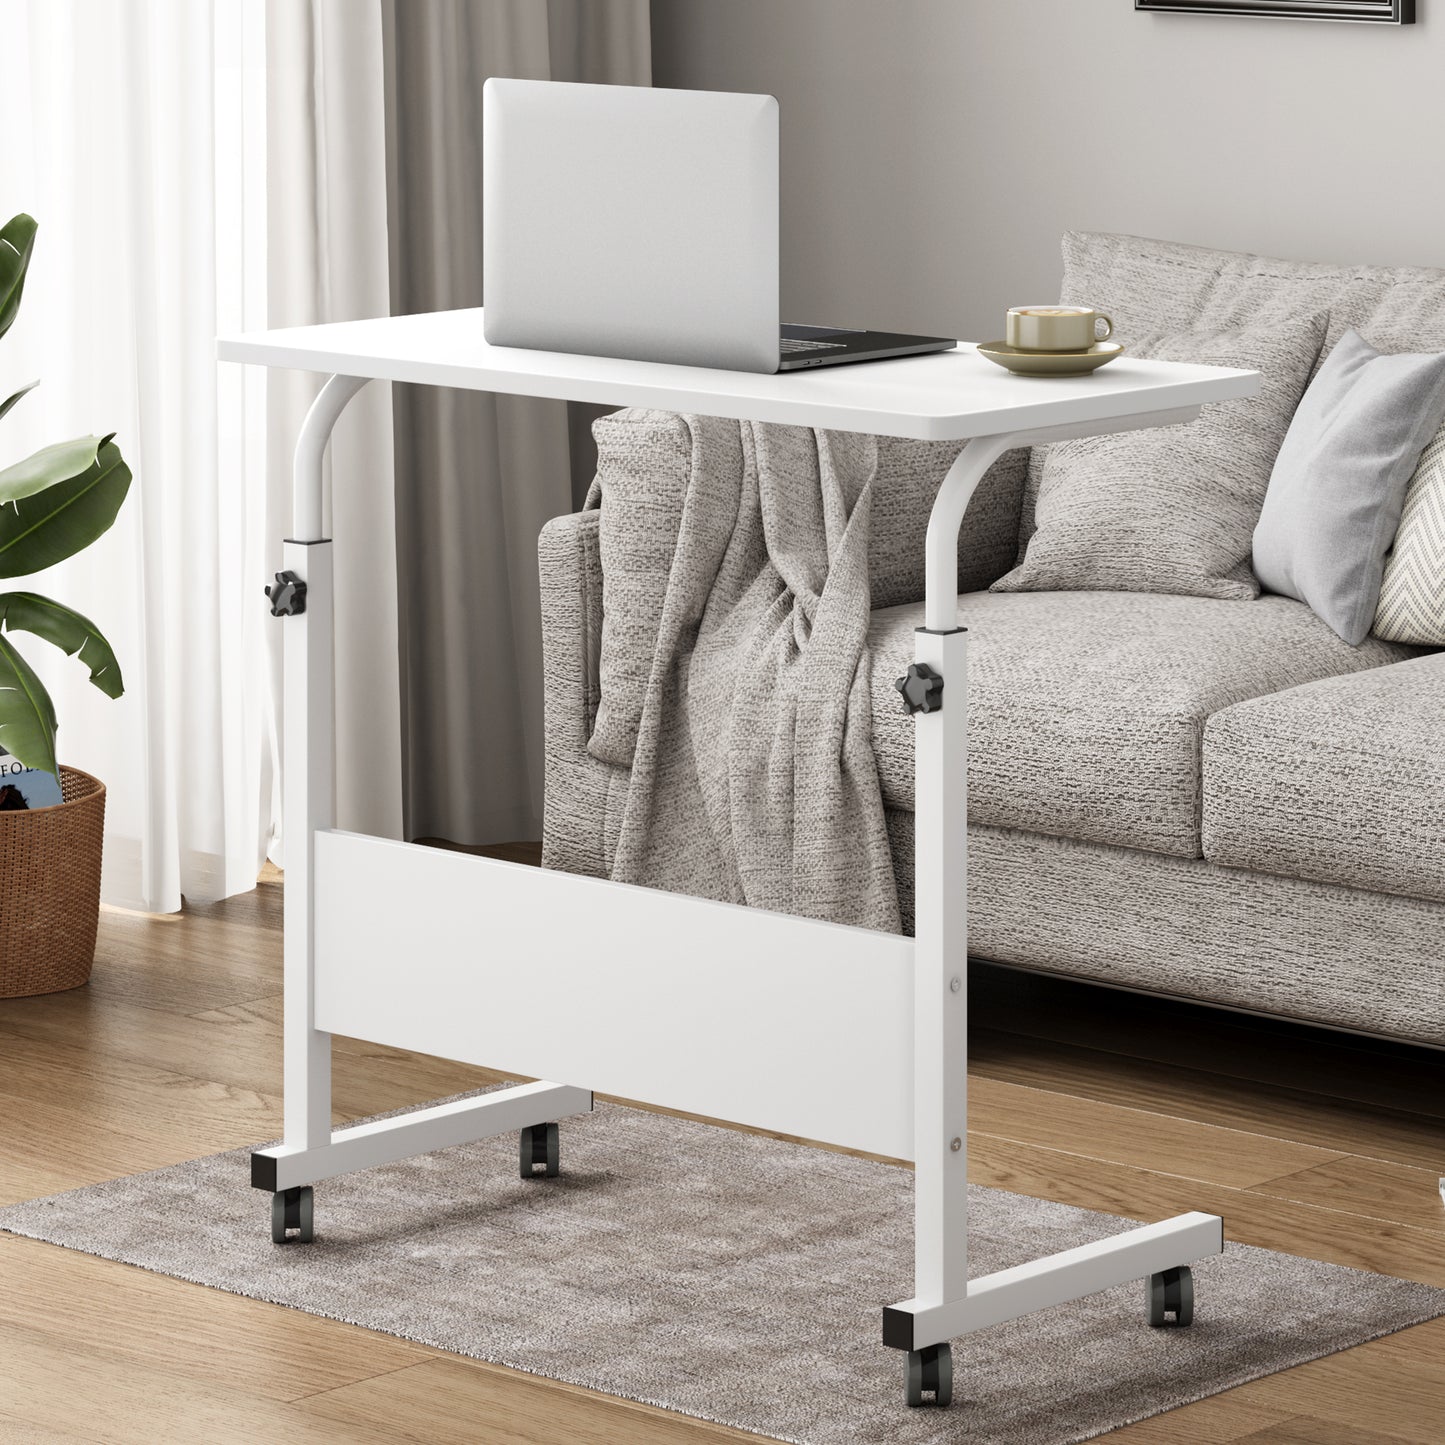 SogesPower C-Shaped Standing Computer Desk with Wheels, Movable Side Desk, Height Adjustable